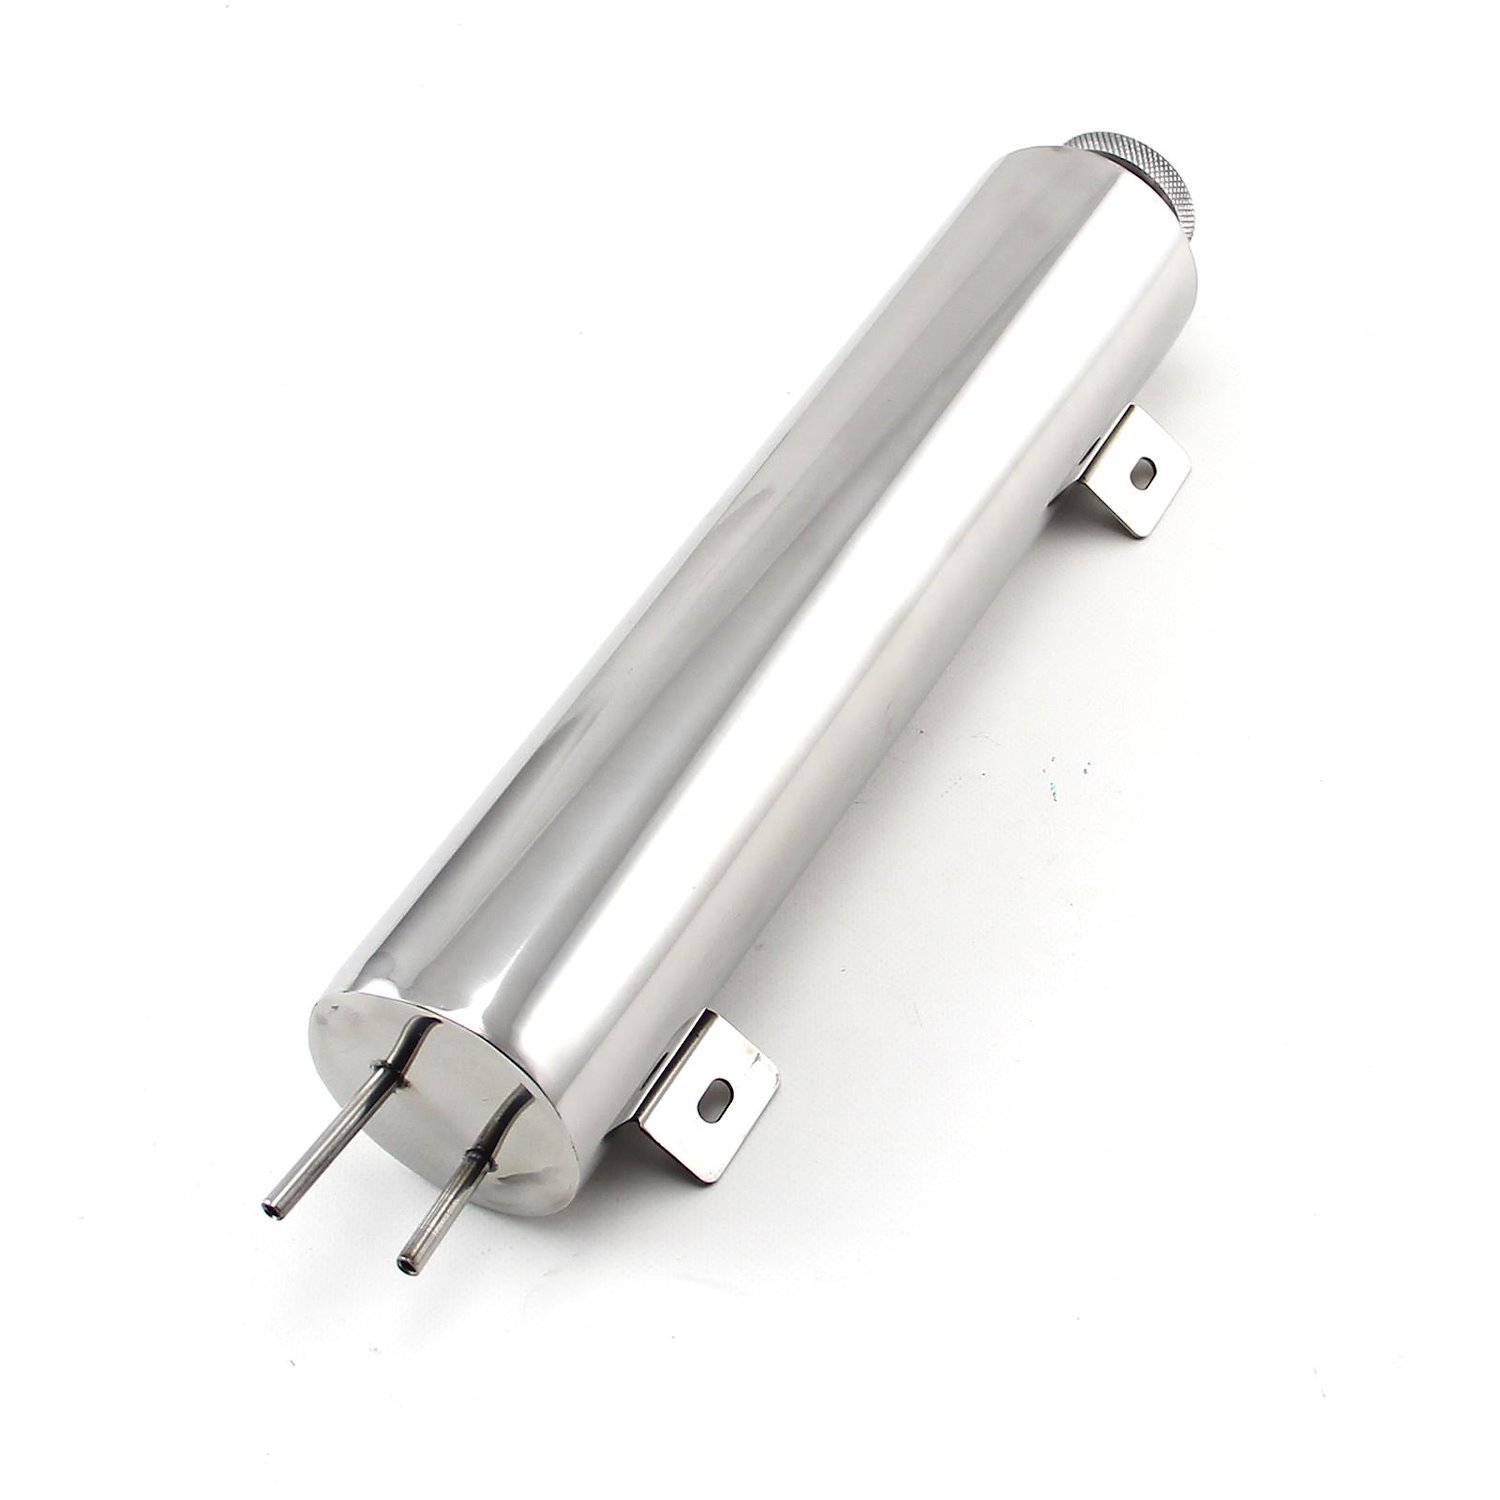 3 x 15 Stainless Steel Overflow Tank With Mounting Bracket Kit